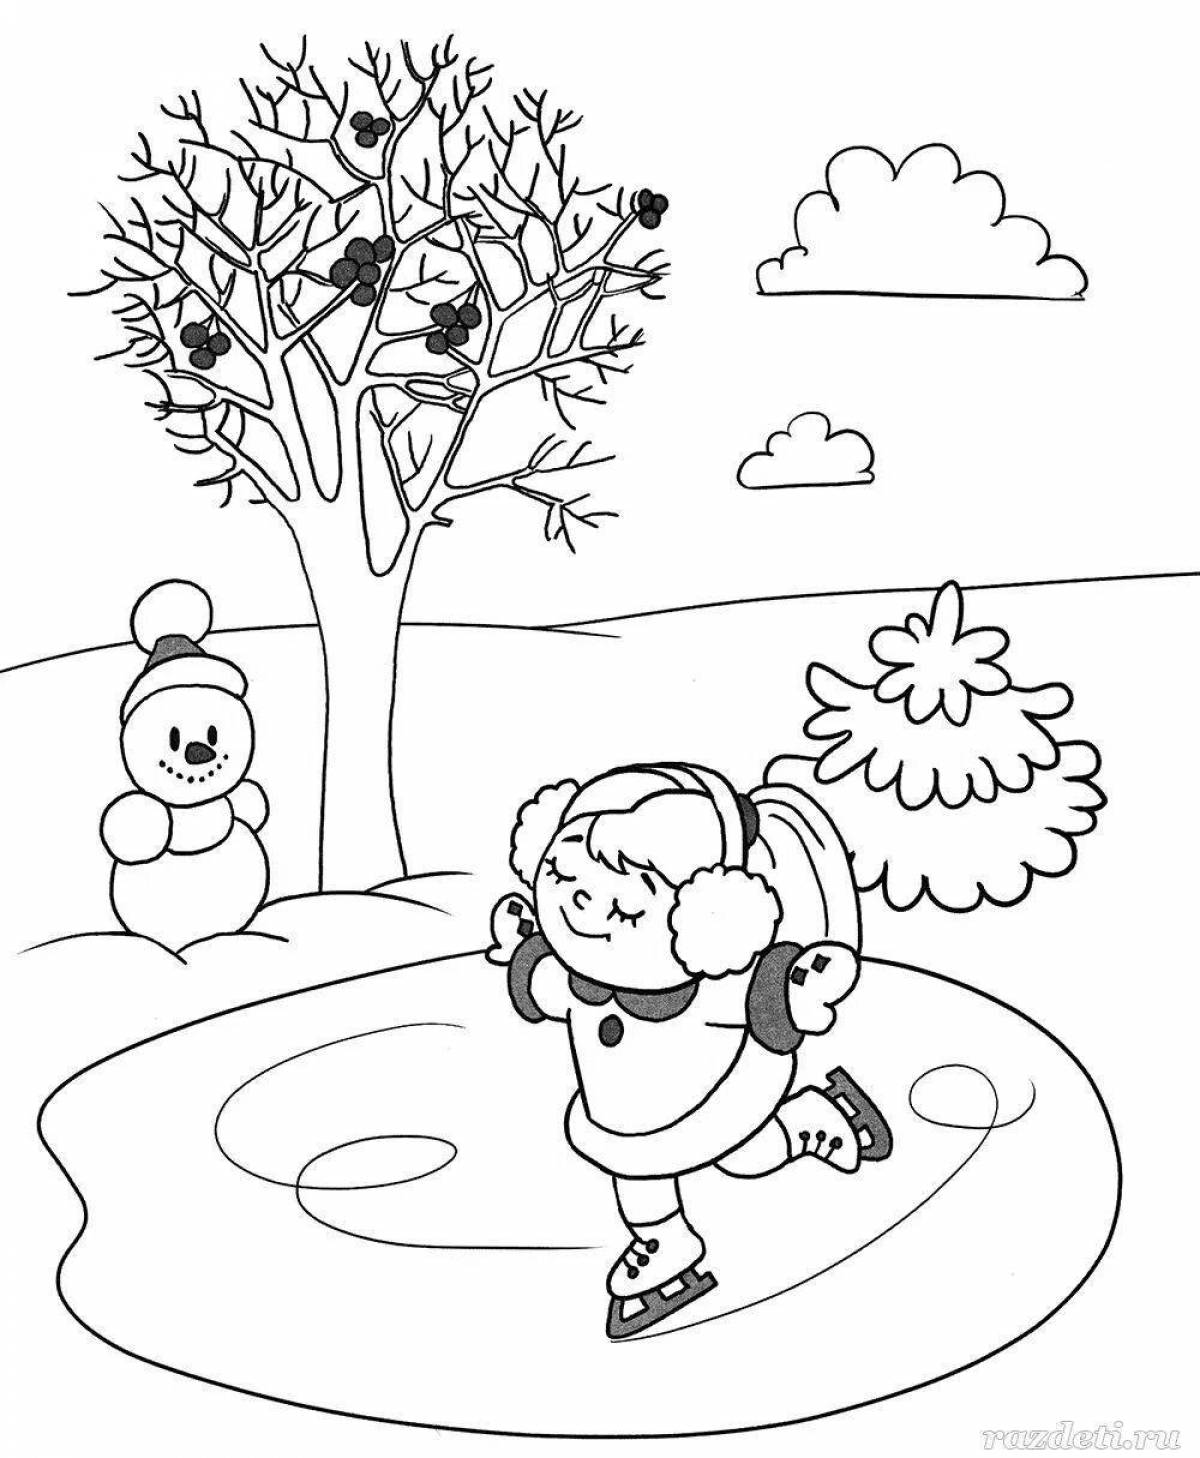 Color-explosion junior group winter coloring page